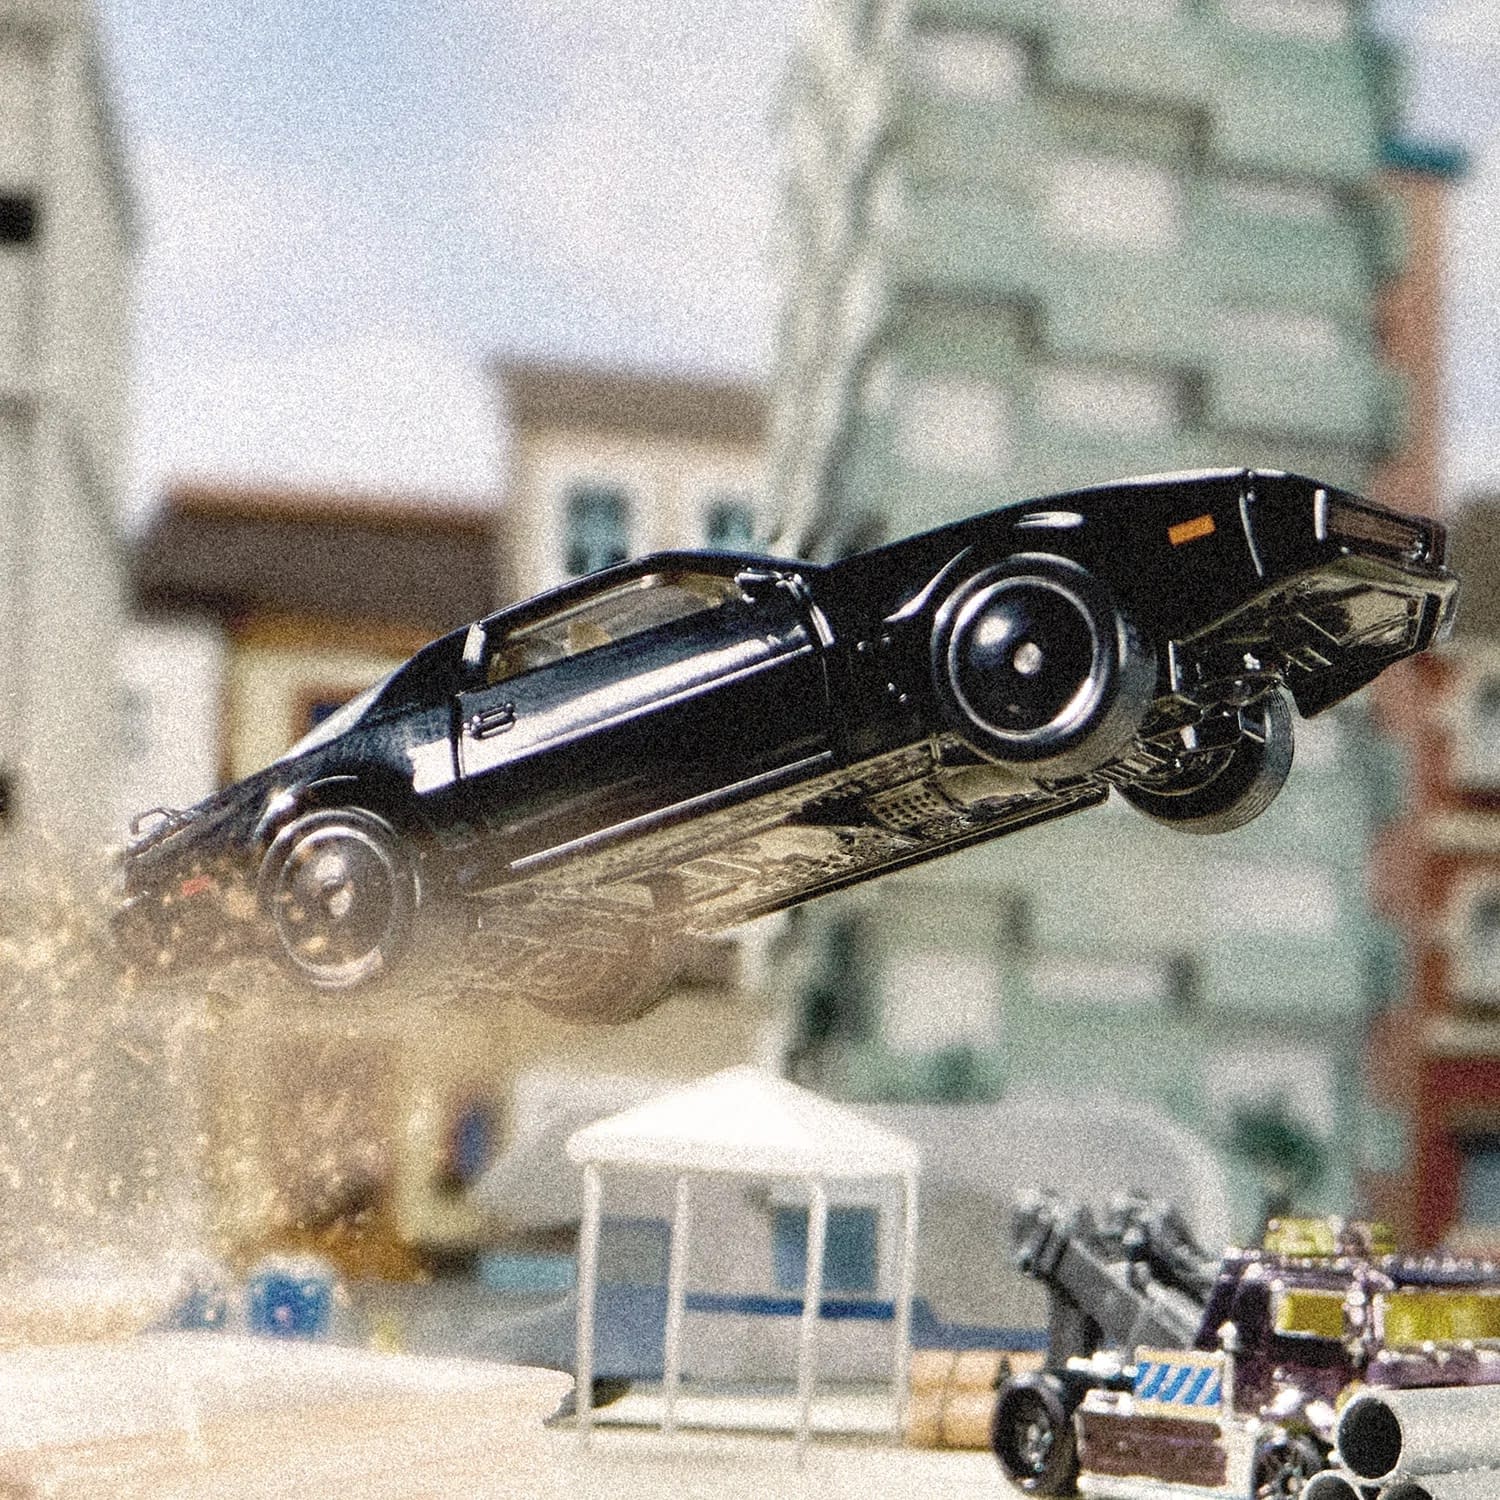 Knight Rider Comes to SDCC 2022 with Hot Wheels Exclusive Car